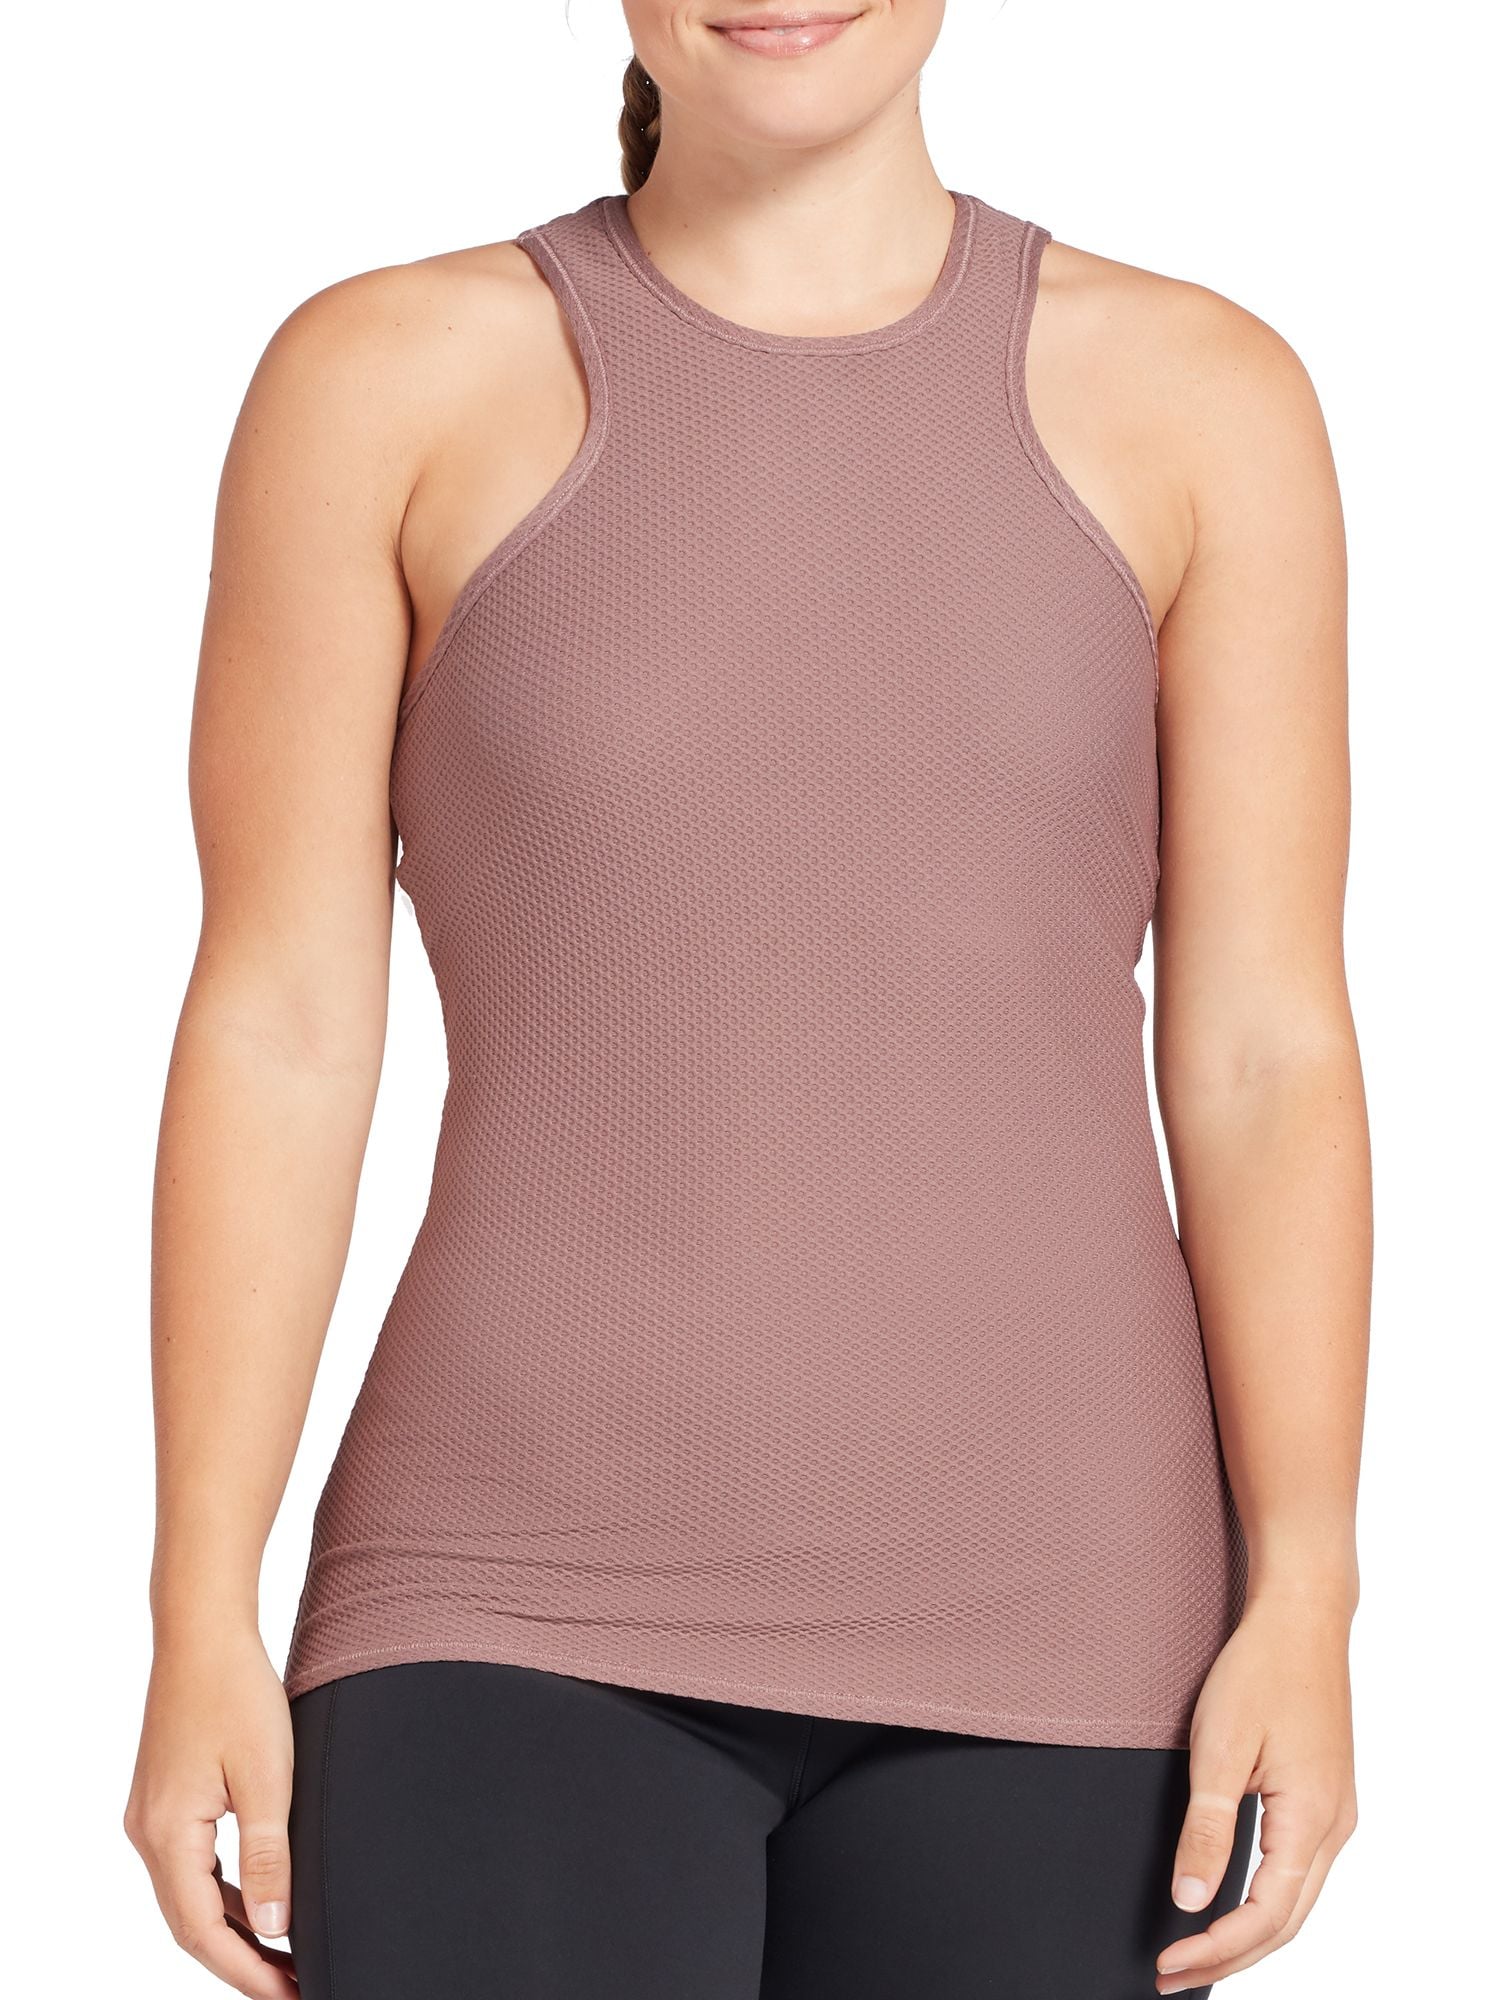 CALIA by Carrie Underwood, Tops, Calia Rib Racer Tank Workout Top  Activewear Athletic